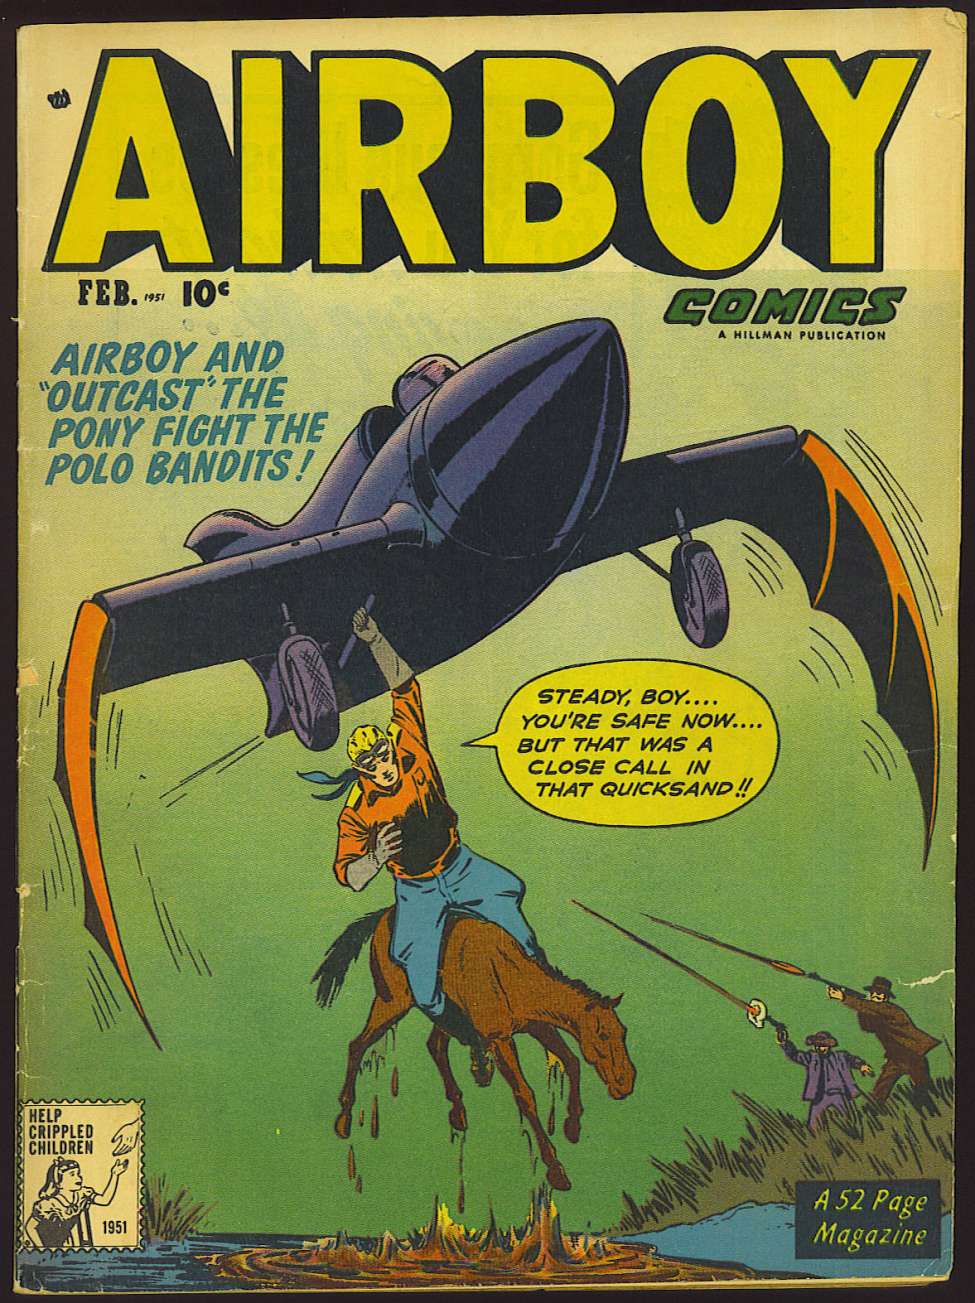 Book Cover For Airboy Comics v8 1